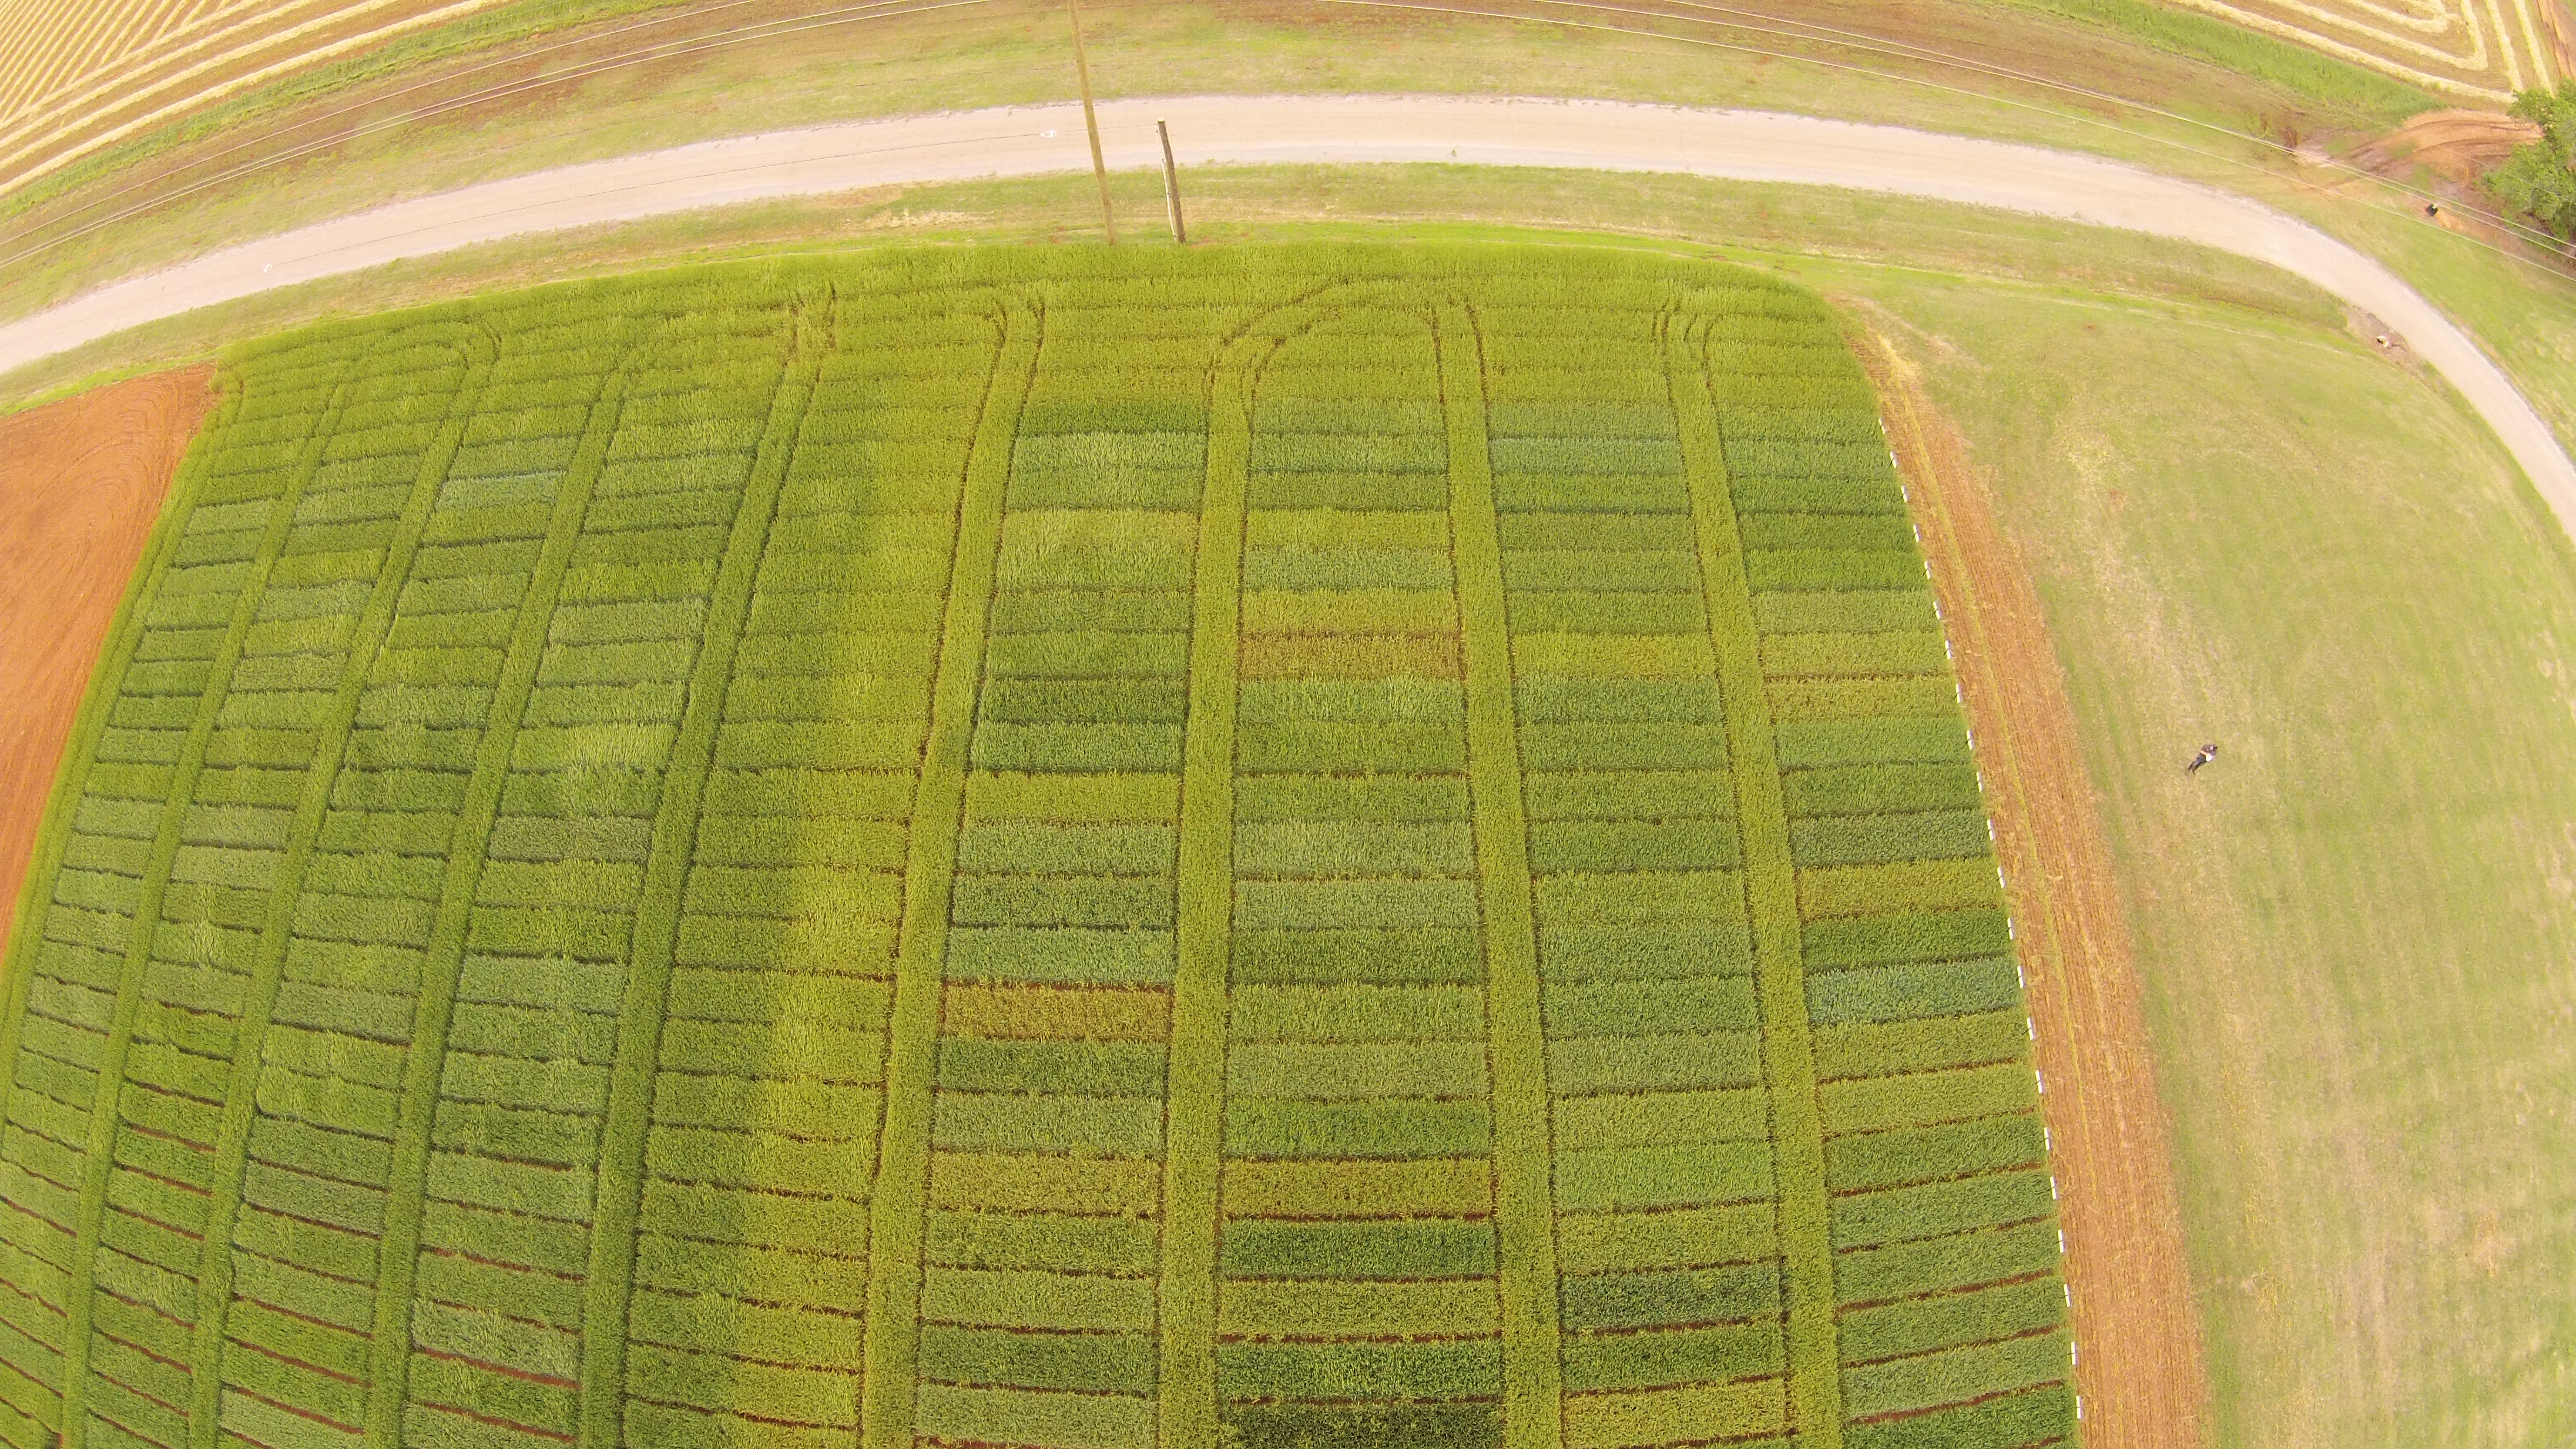 This overhead shot of the 2015 Chickasha intensive and standard wheat variety trials illustrates the severity of stripe rust in the region. The intensively managed trials on the left was treated with a fungicide just prior to heading. The standard trial on the right has the exact same varieties but no fungicide. The "middle" replication between the two studies is a border of Ruby Lee that is 1/2 treated 1/2 non treated. 